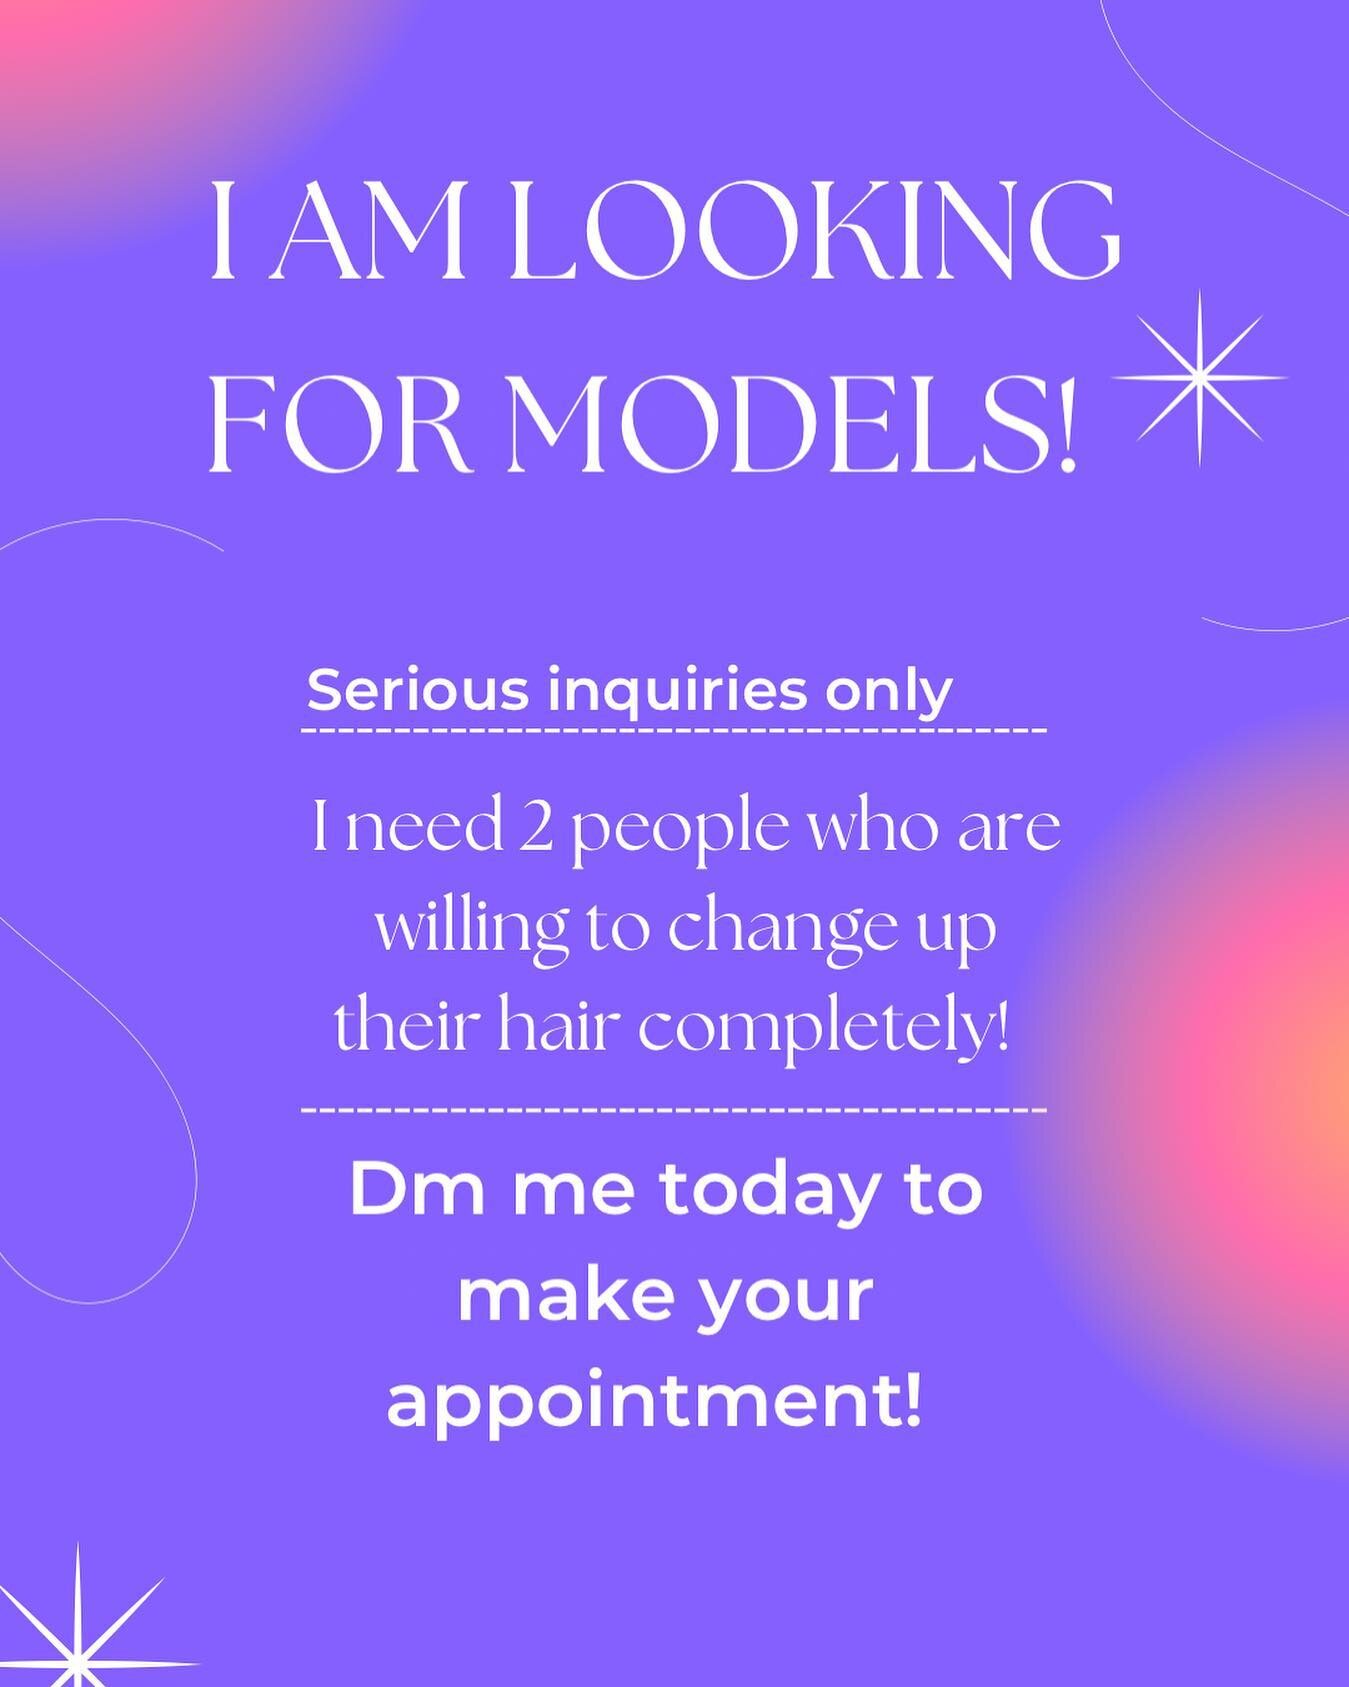 Looking to change up your hair before the summer season? 

Im looking for 2 hair models to change up their hair! Serious inquiries only. Dm me today to get this great deal!